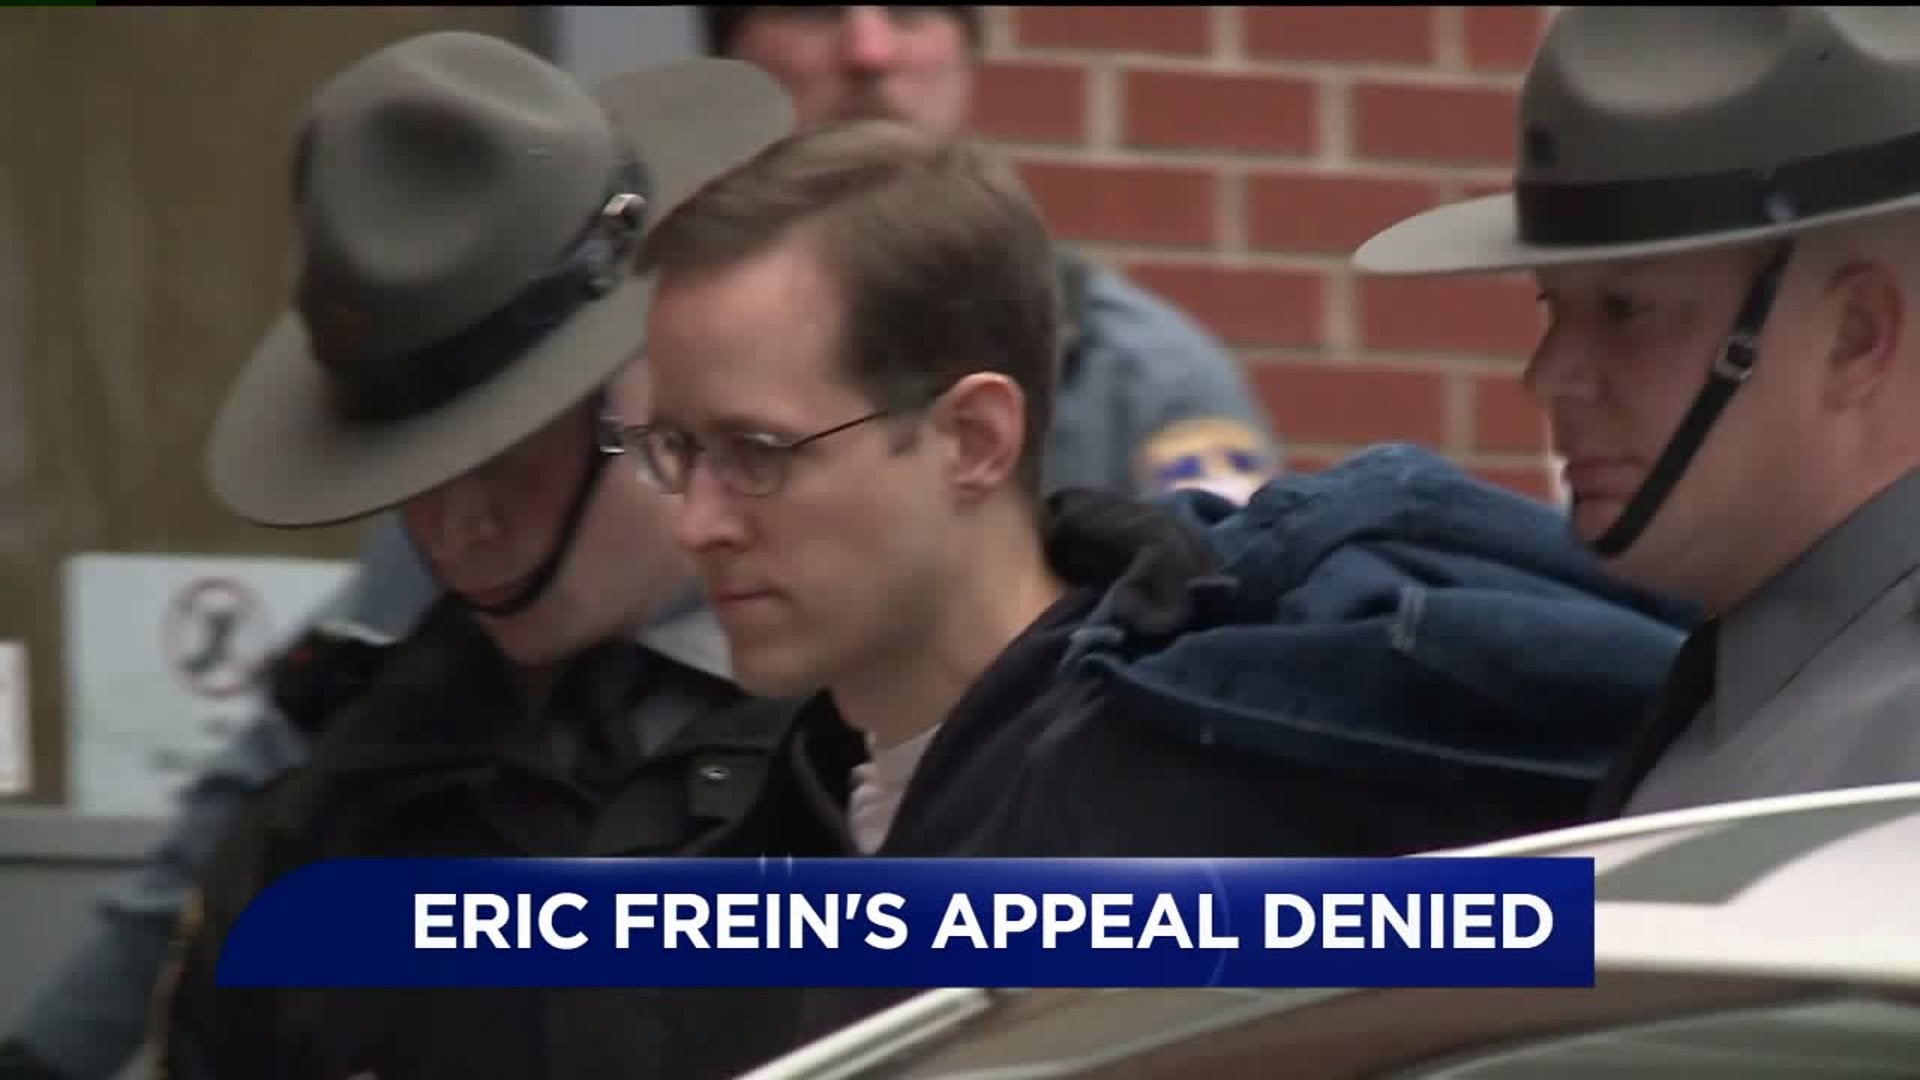 Eric Frein Conviction, Death Sentence Upheld by Supreme Court